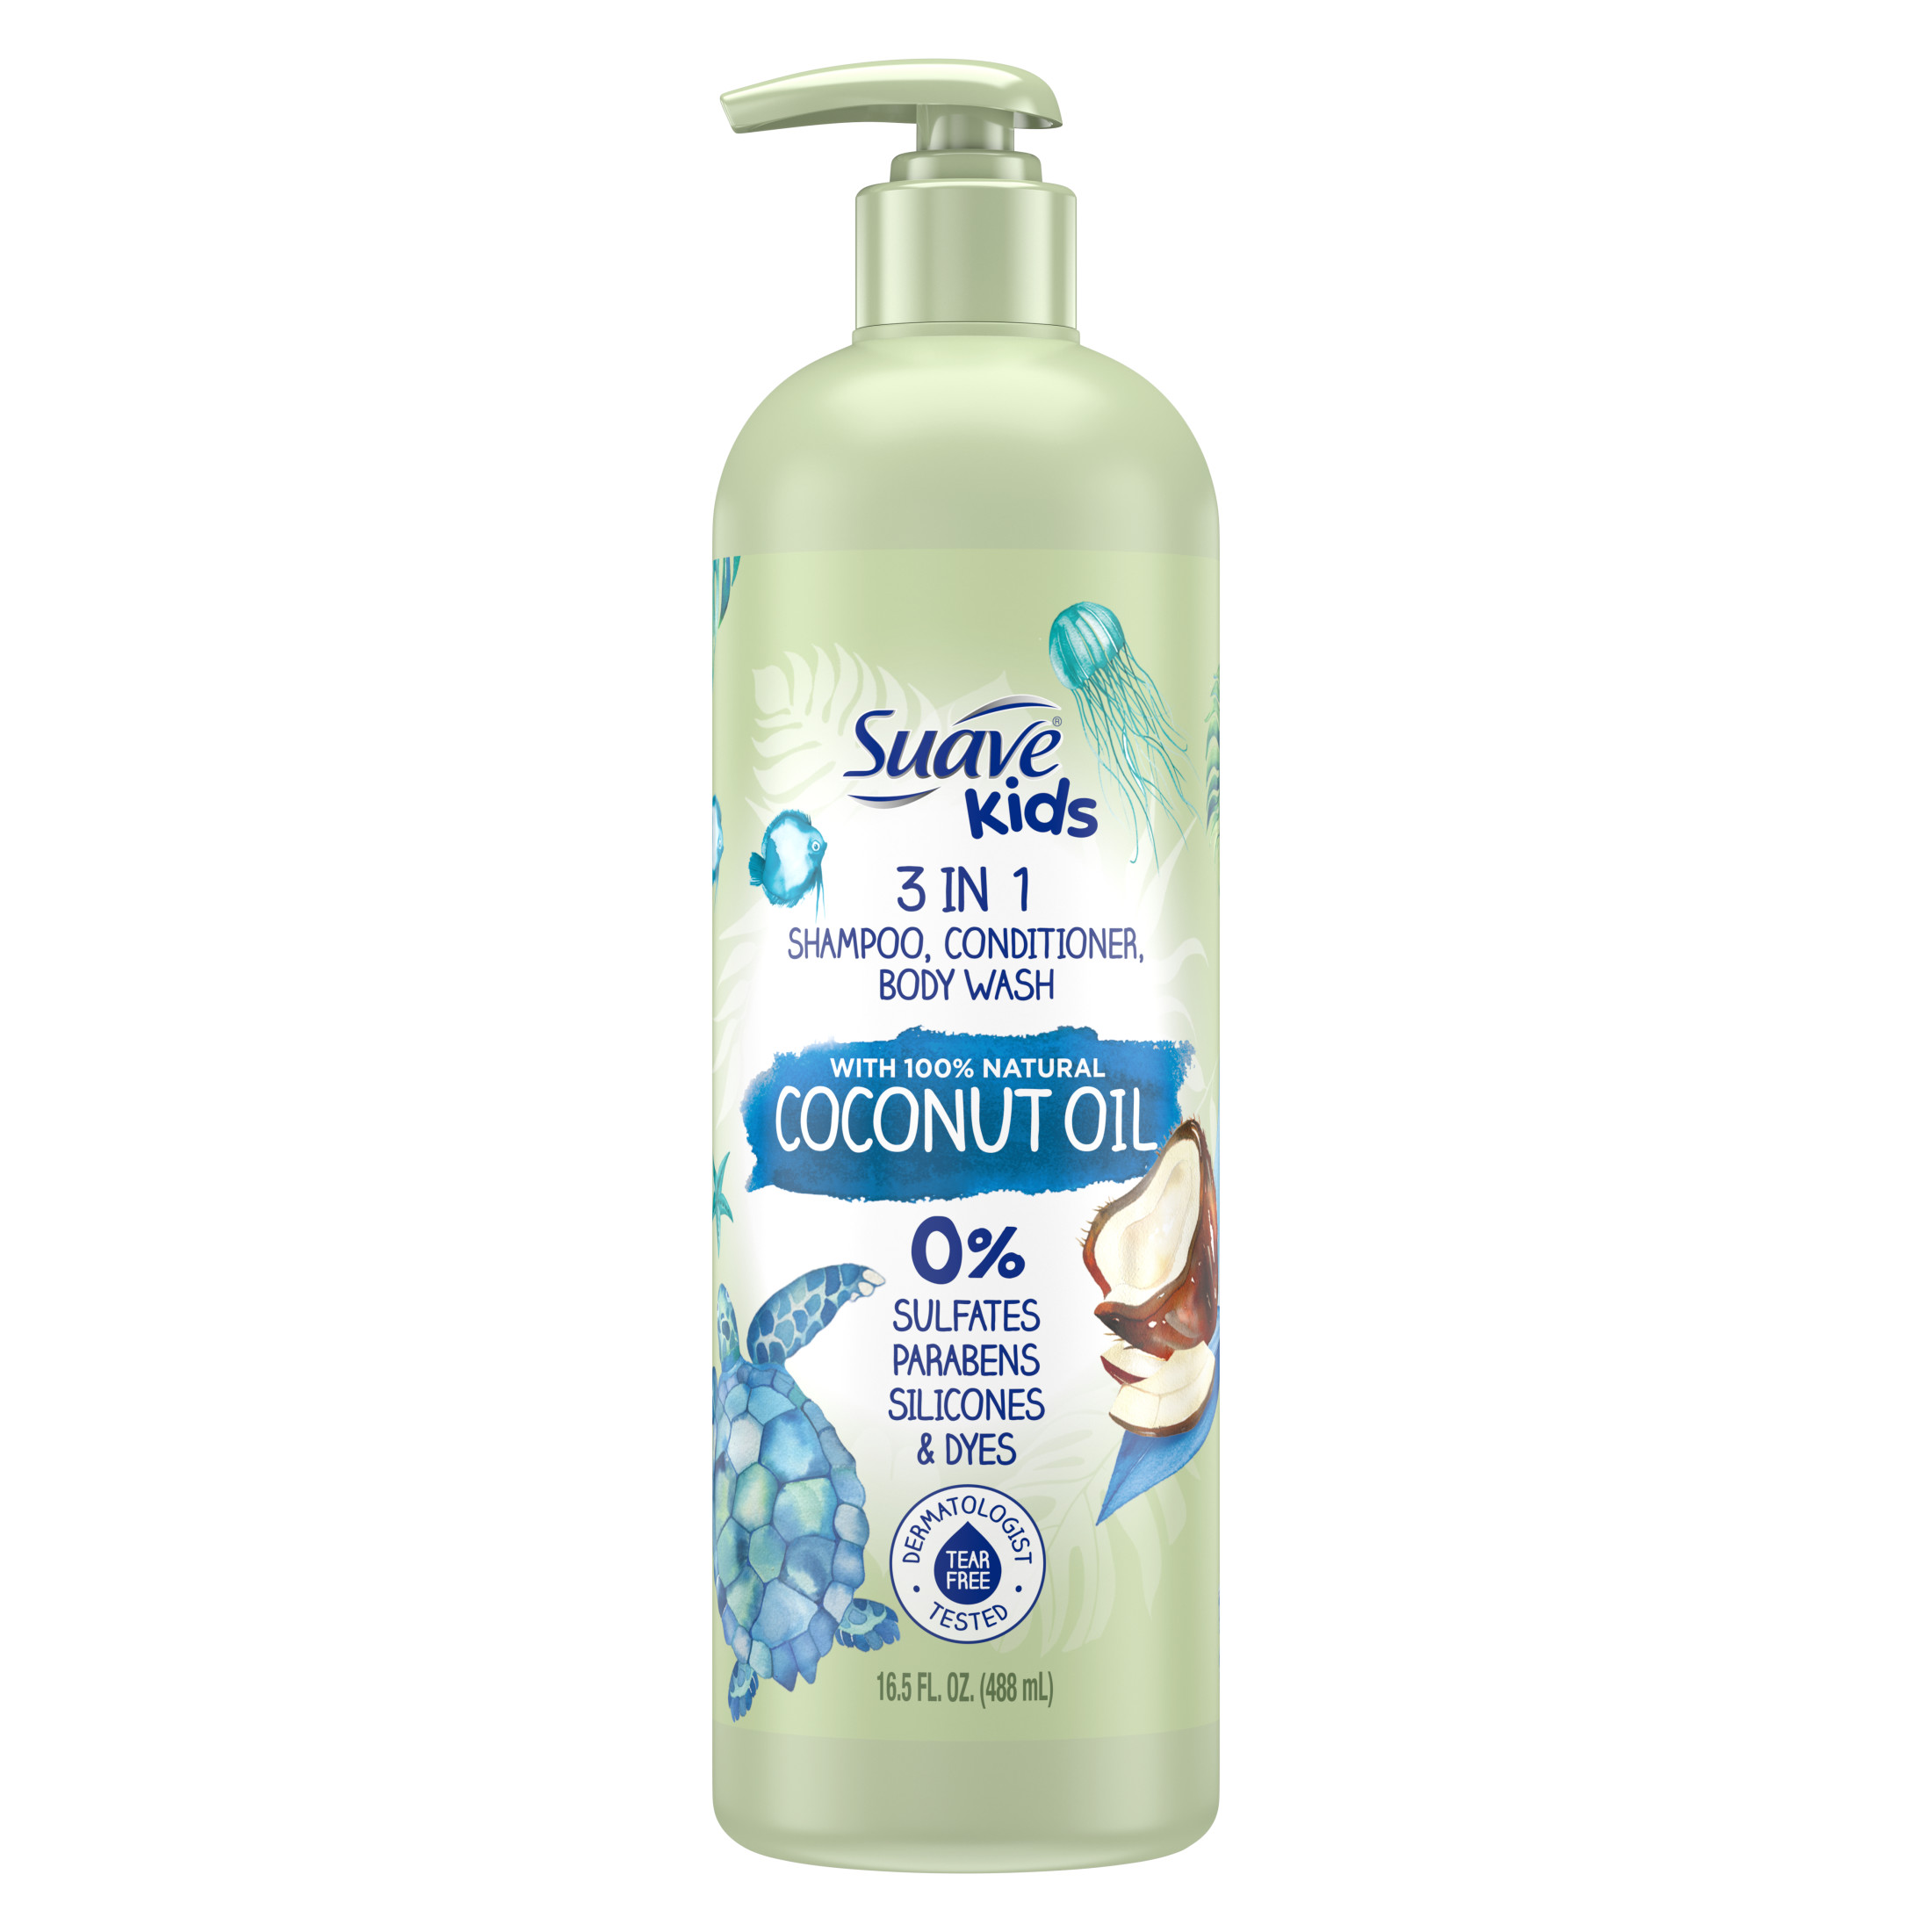 Suave Kids Naturals 3-in-1 Shampoo Conditioner & Body Wash with Coconut Oil, 16.5 oz - image 1 of 10